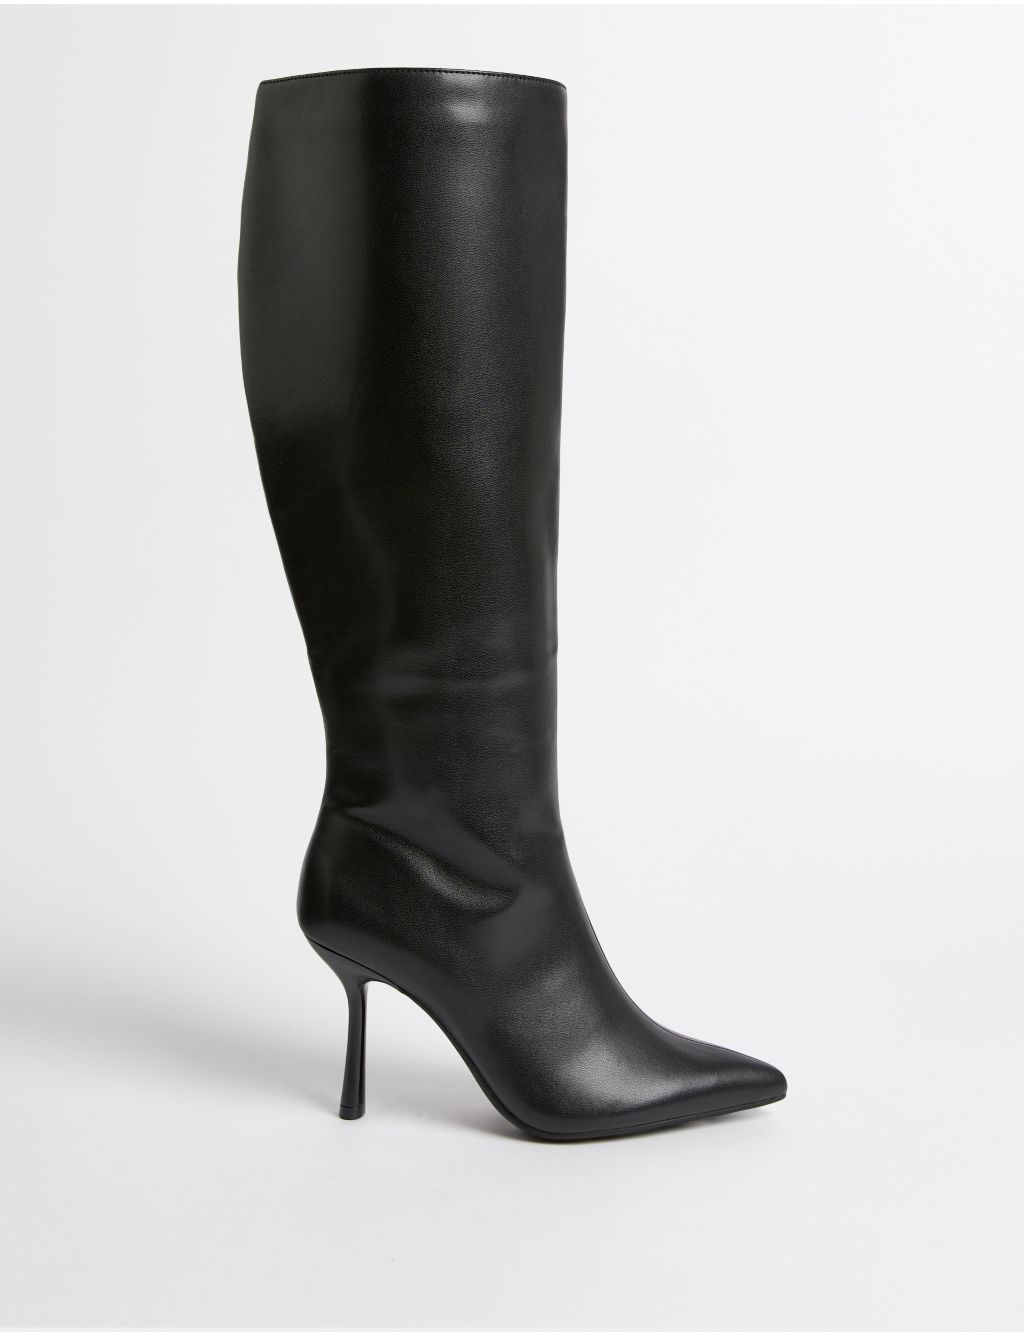 Stiletto Heel Pointed Knee High Boots | M&S Collection | M&S